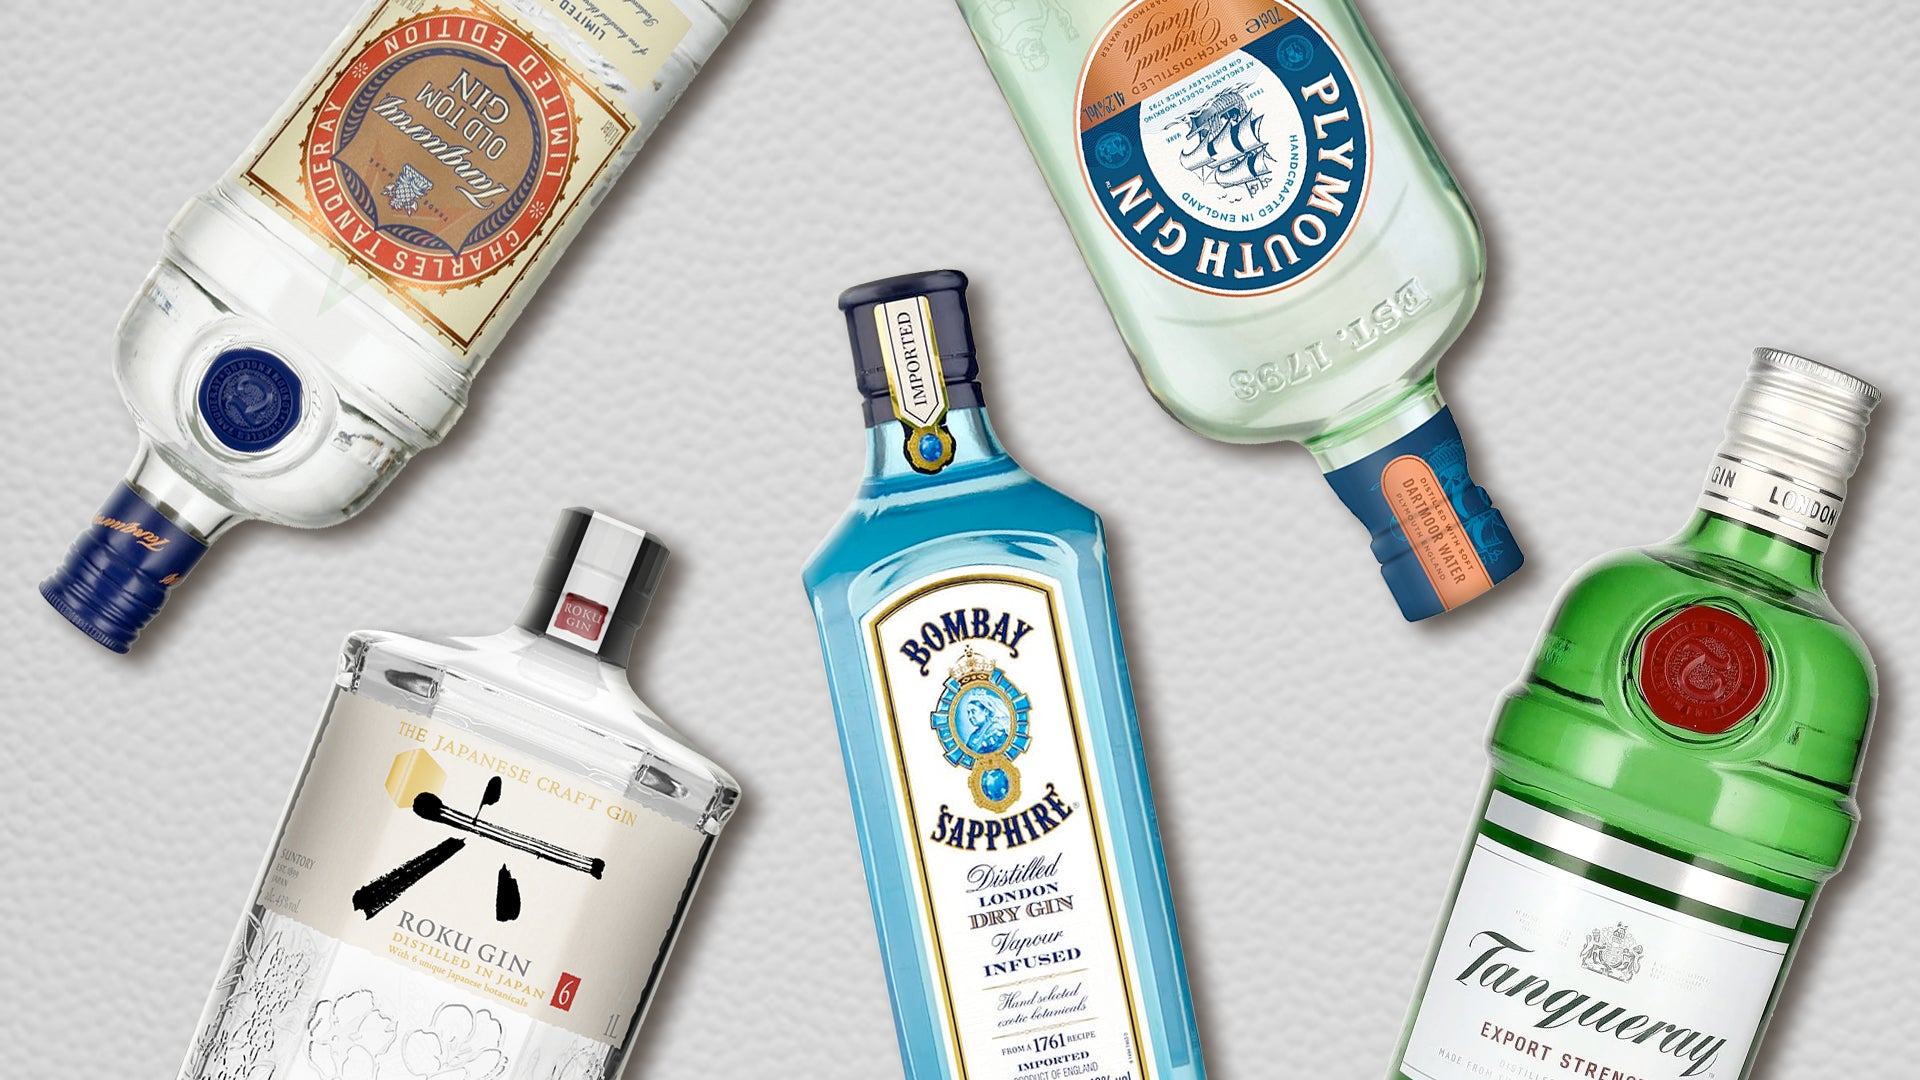 Most of Gin: the Types to Guide Popular Varieties A